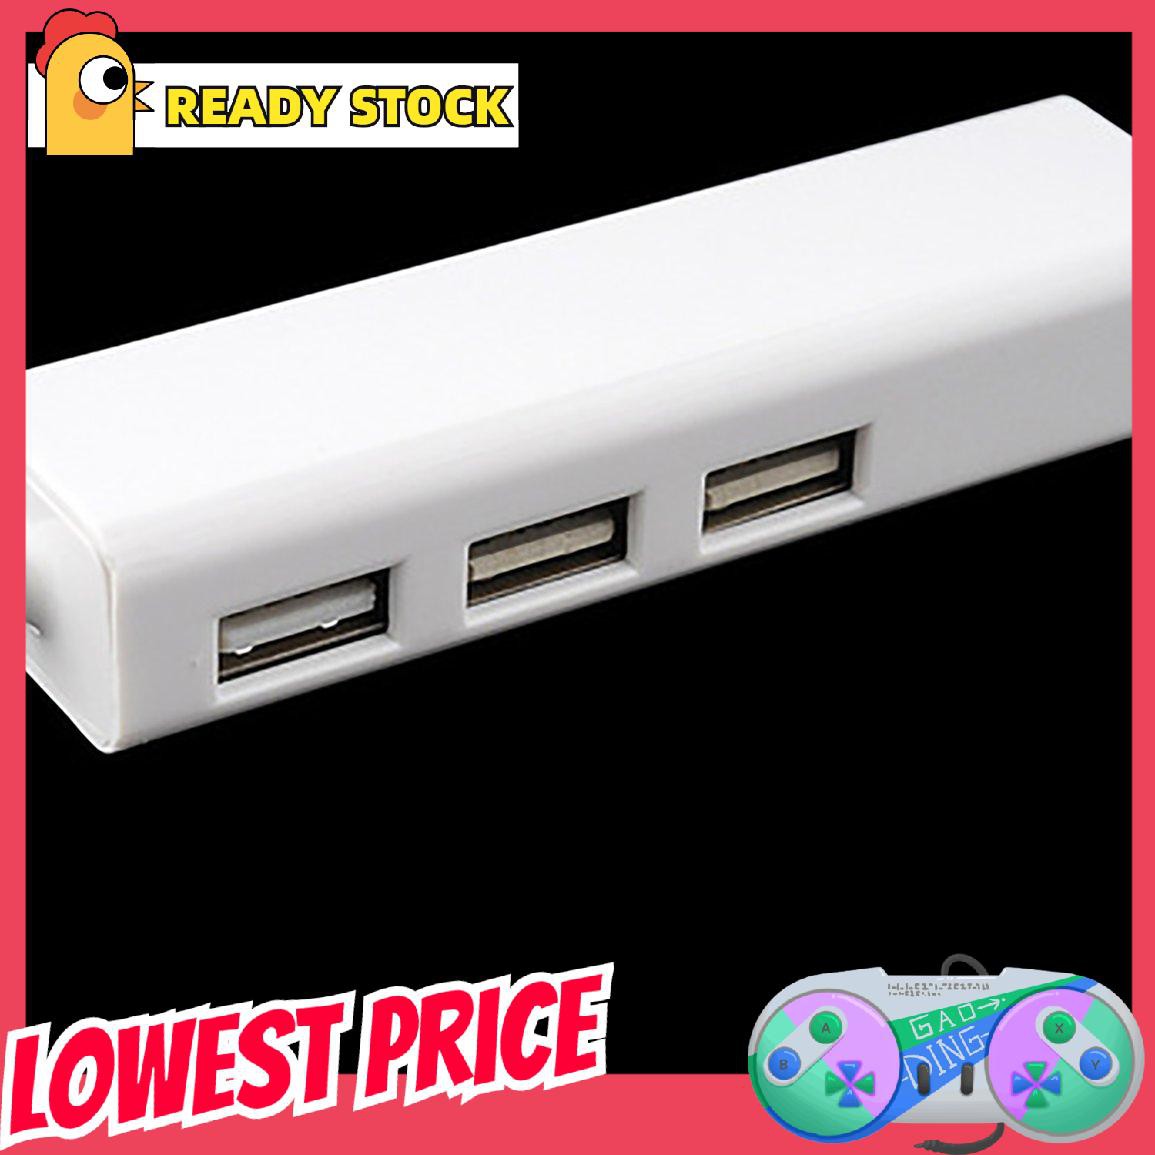 [lovely]High Speed USB 2.0 to Network LAN Ethernet RJ45 Adapter with 3 Port USB HUB